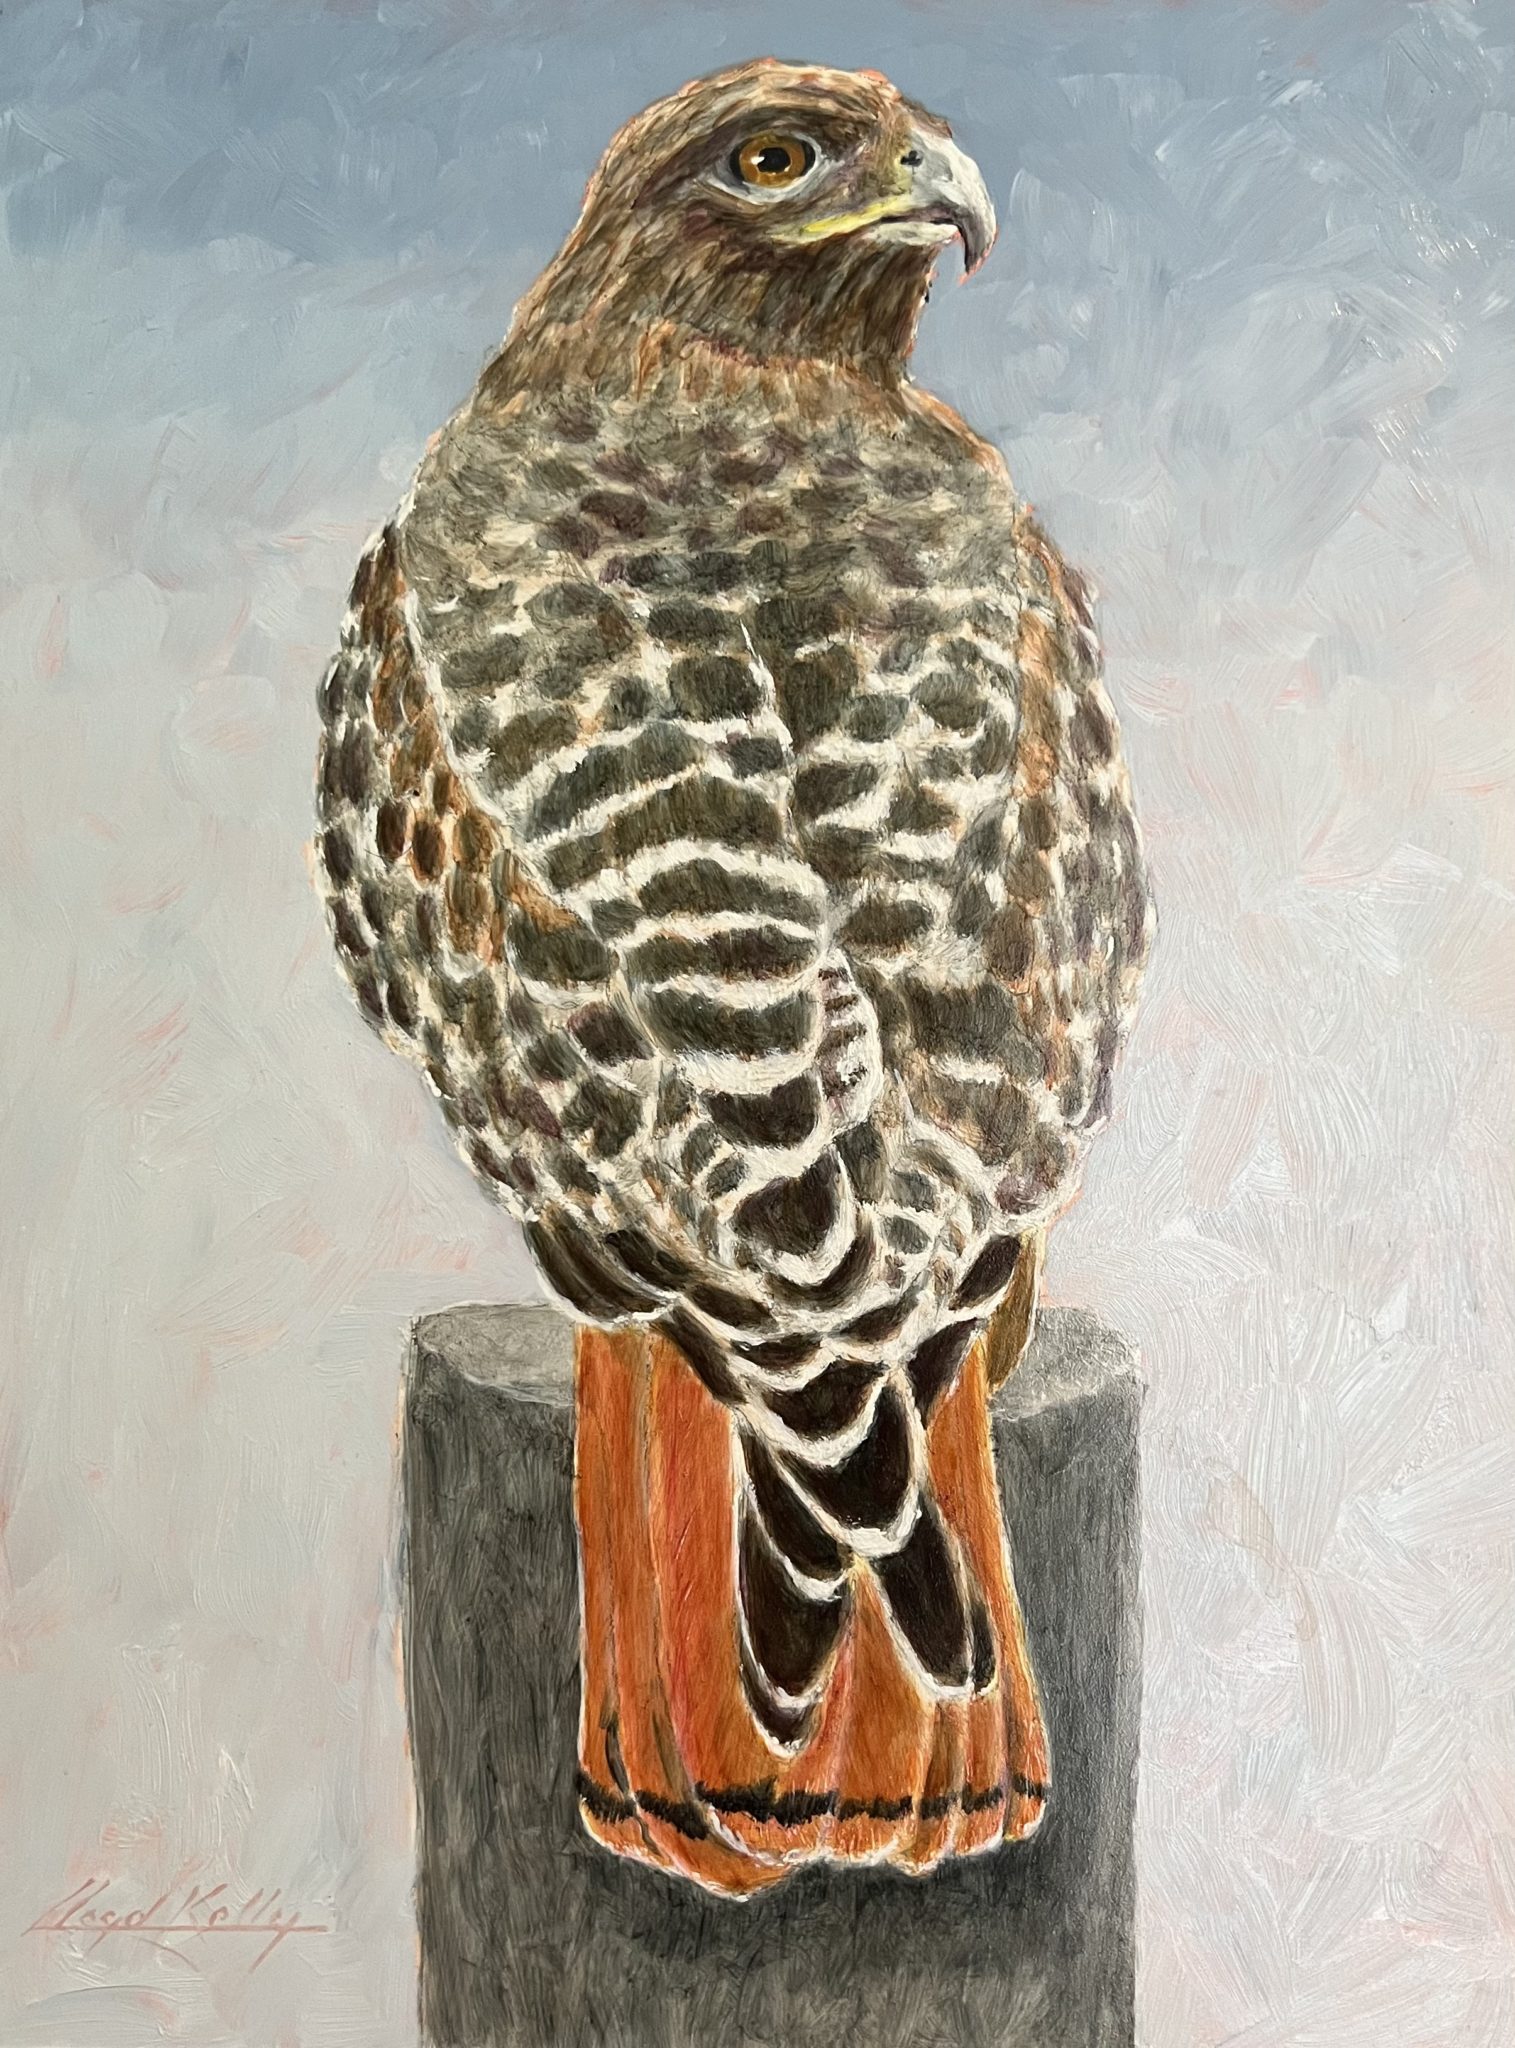 Oil painting of a red-tailed hawk